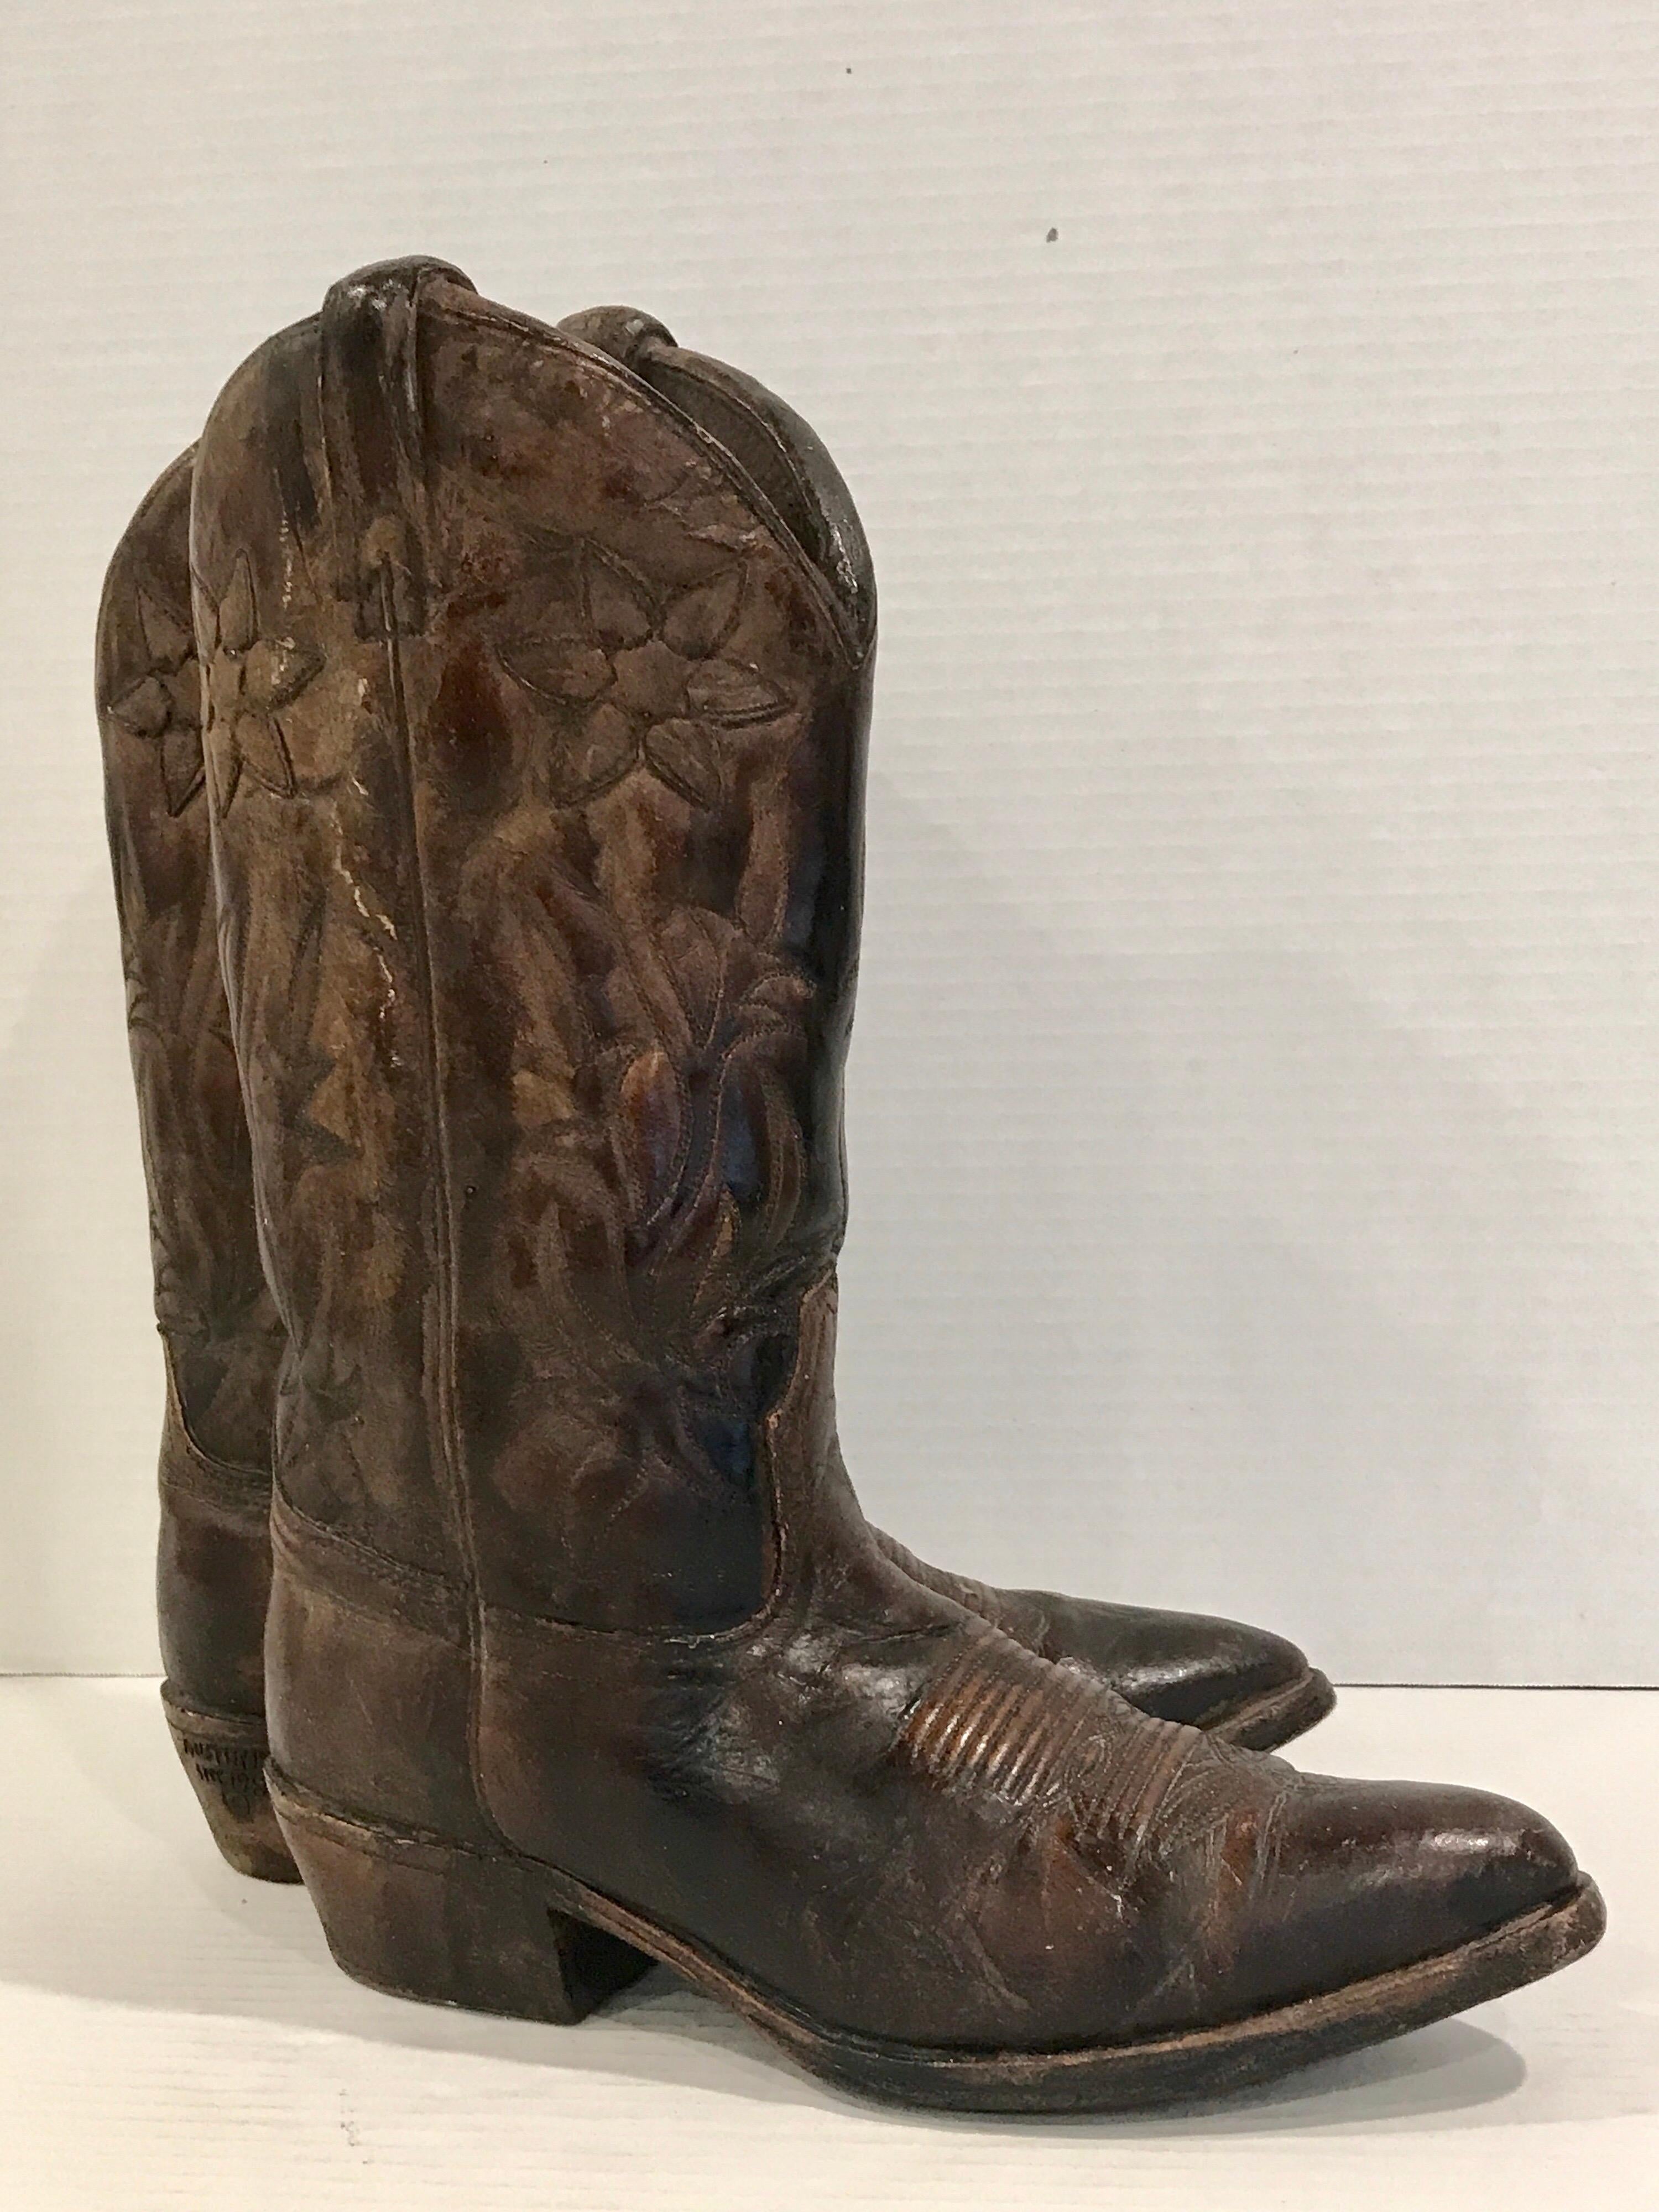 A pair of cowboy boots sculpture / trade sign, realistically modeled, polychromed with incised decoration.